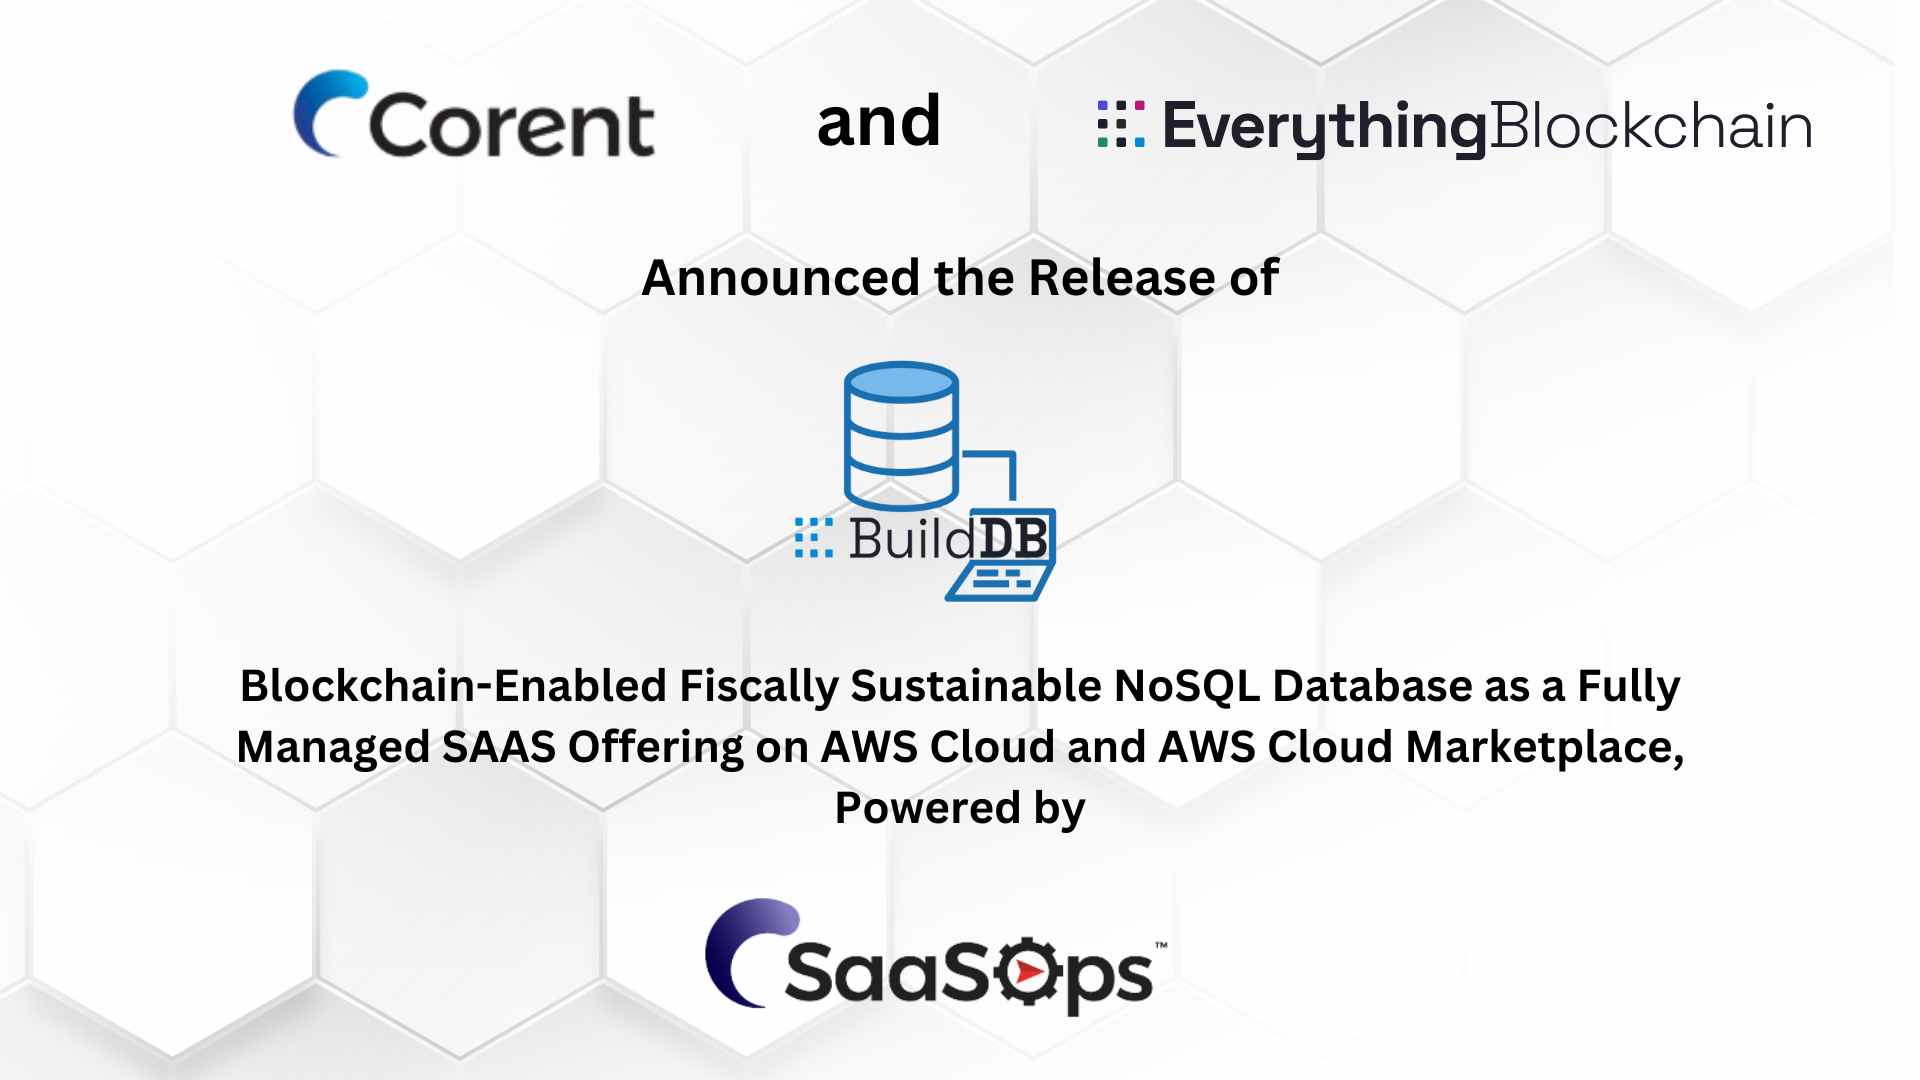 Corent’s SaaSOps™ powers Everything Blockchain’s next-gen “Database as a Service” on AWS Cloud and AWS Cloud Marketplace